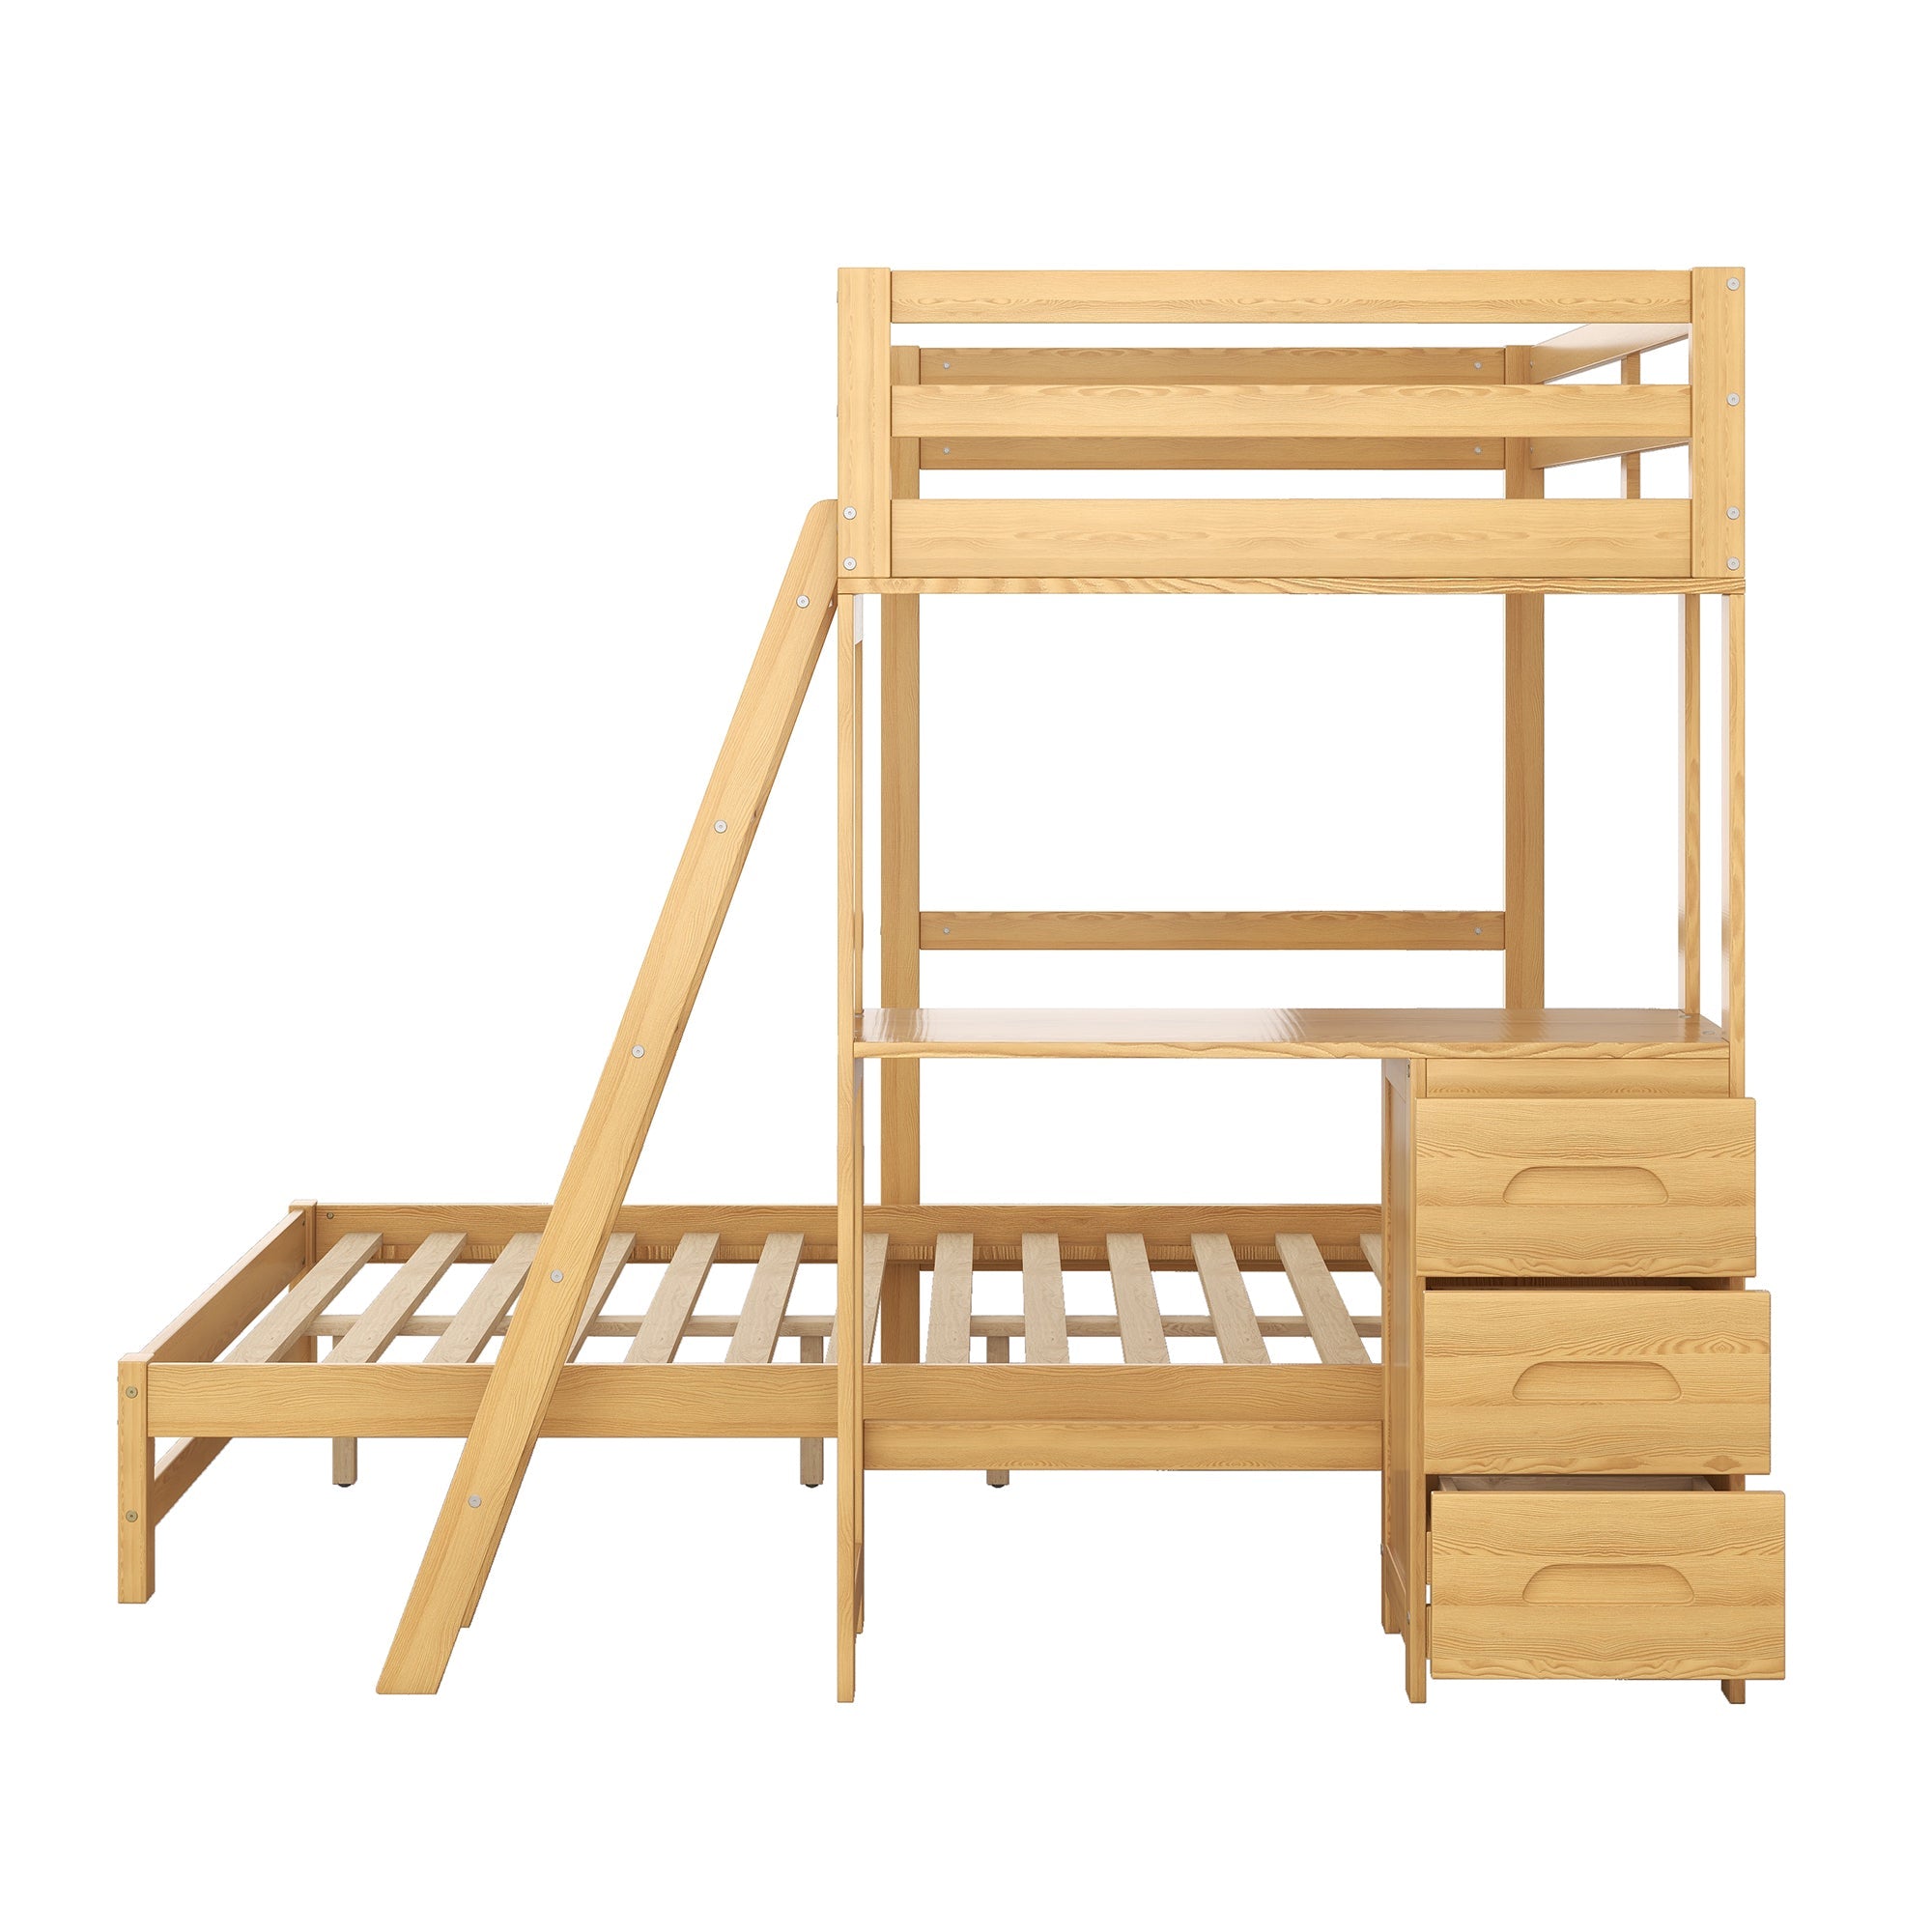 EUROCO Twin over Full Bunk Bed with Desk and Drawers for Kids, Natural